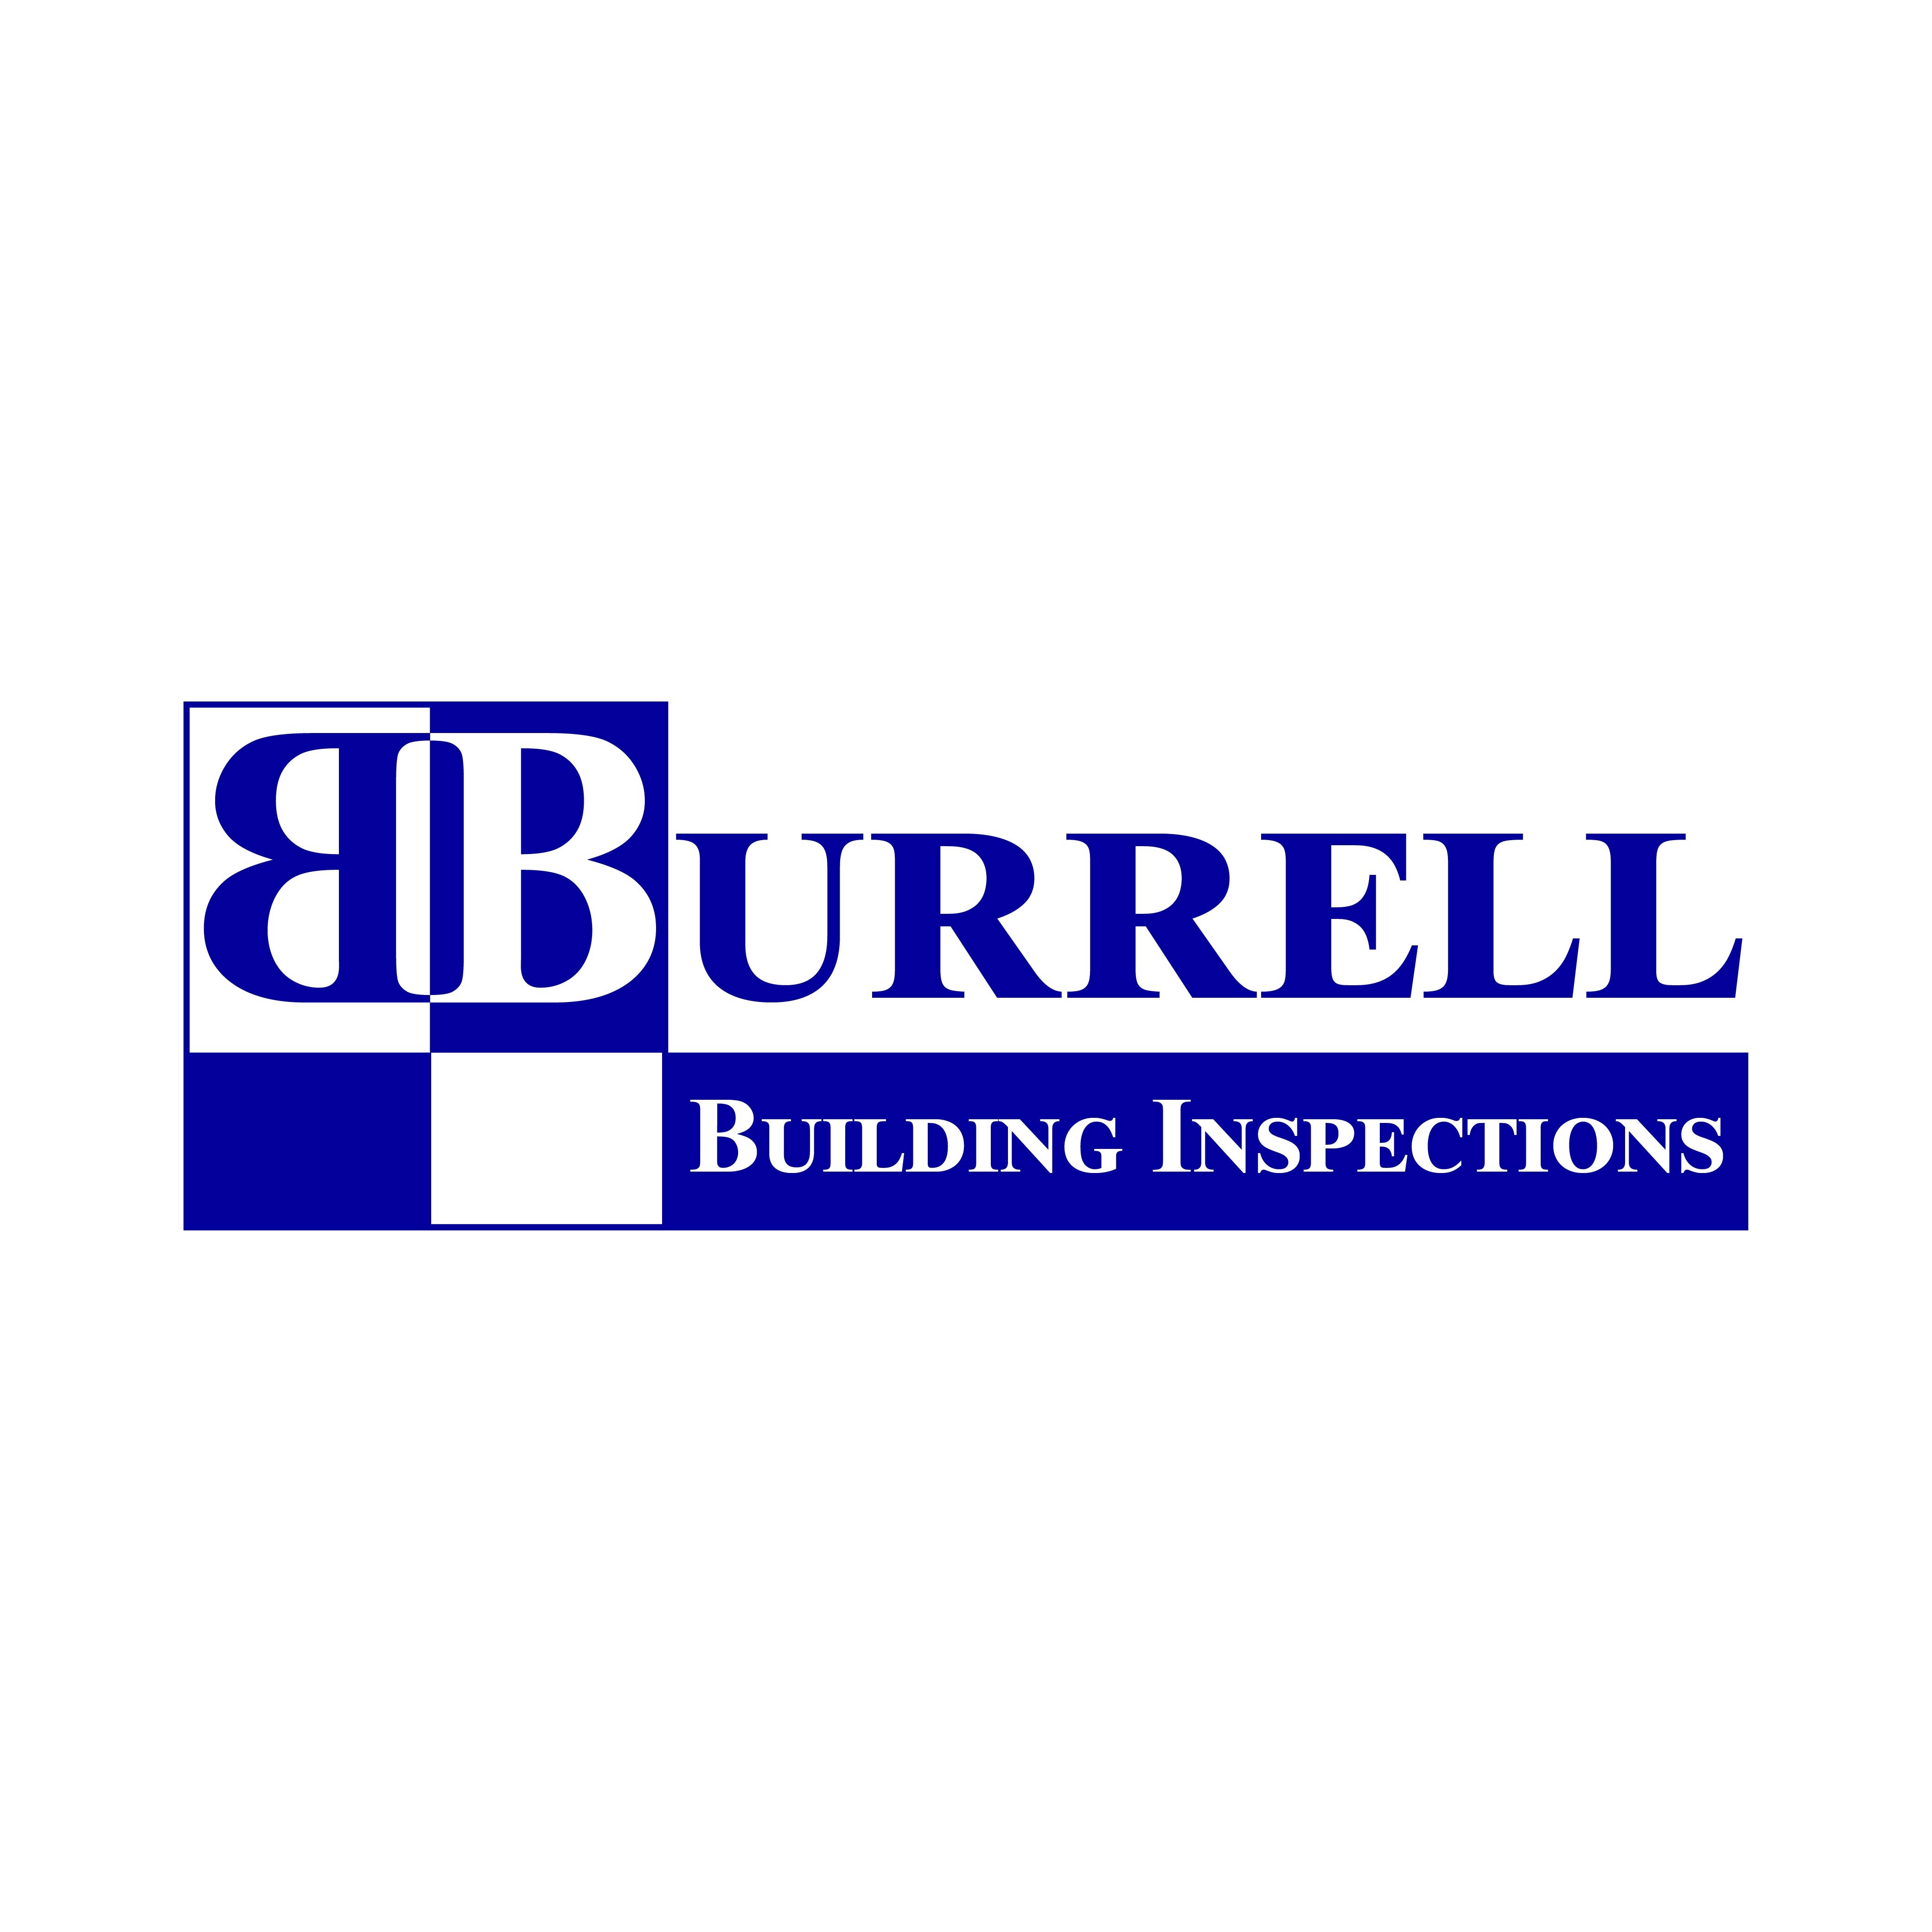 Experience, the Difference. We proudly provide thorough building inspections to our community, supported by our decades of industry experience.